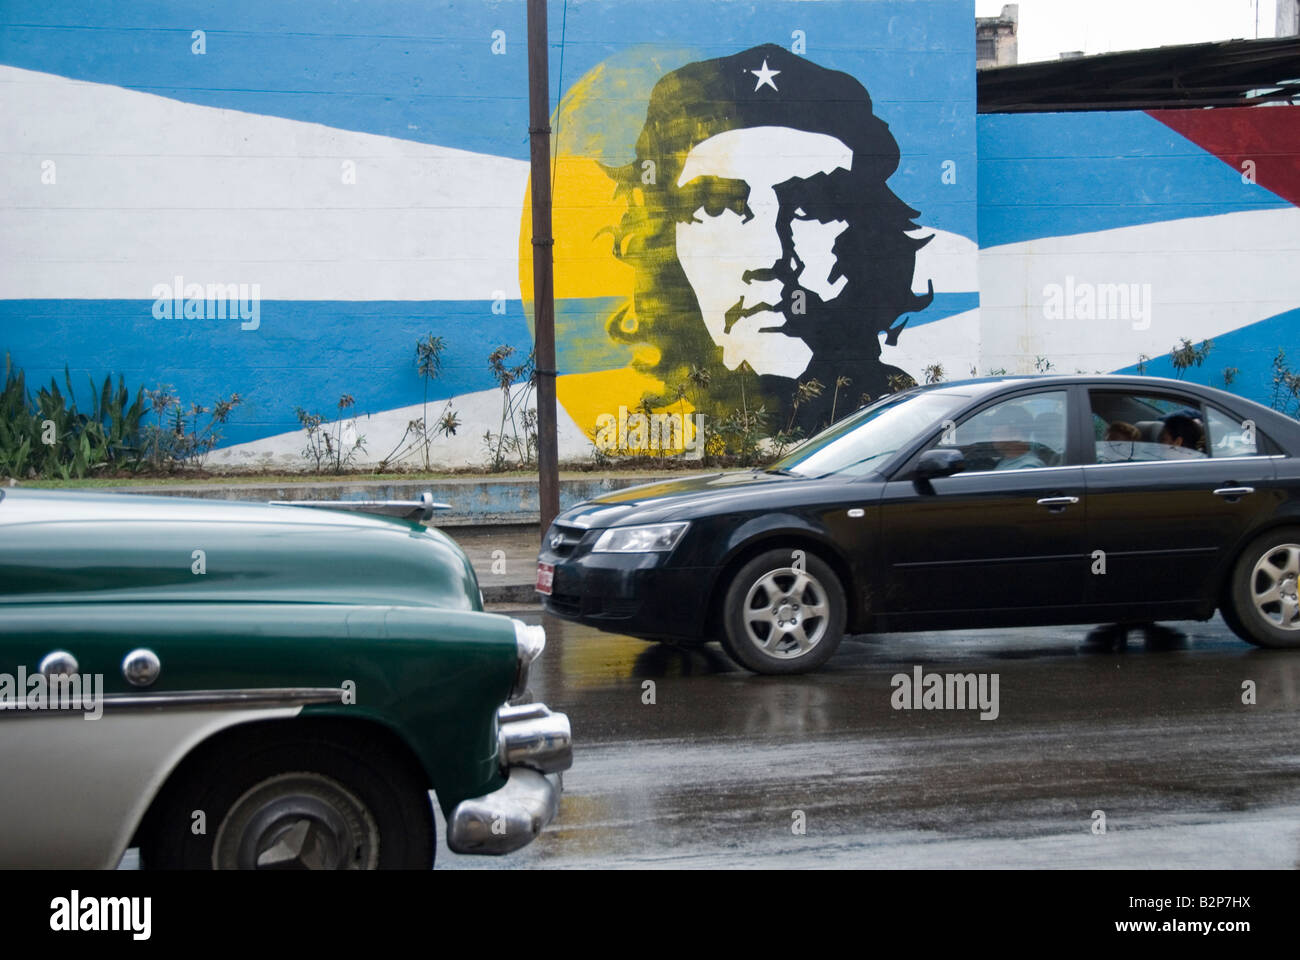 Vintage car and new car passing by a mural of Ernesto Che Guevara during time of embargo in Cuba Central Havana Cuba Stock Photo